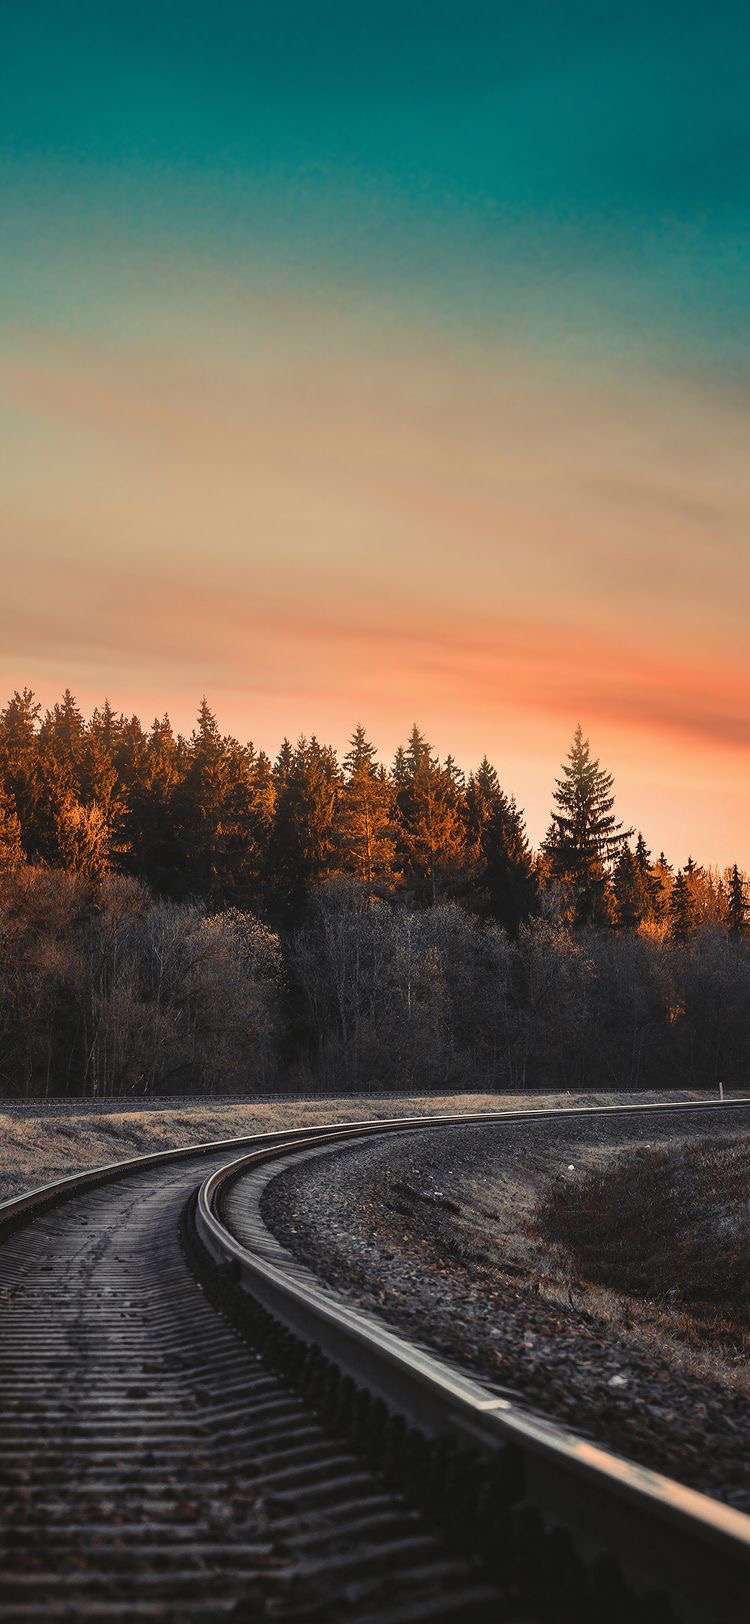 Aesthetic Pictures Of Train Tracks , HD Wallpaper & Backgrounds